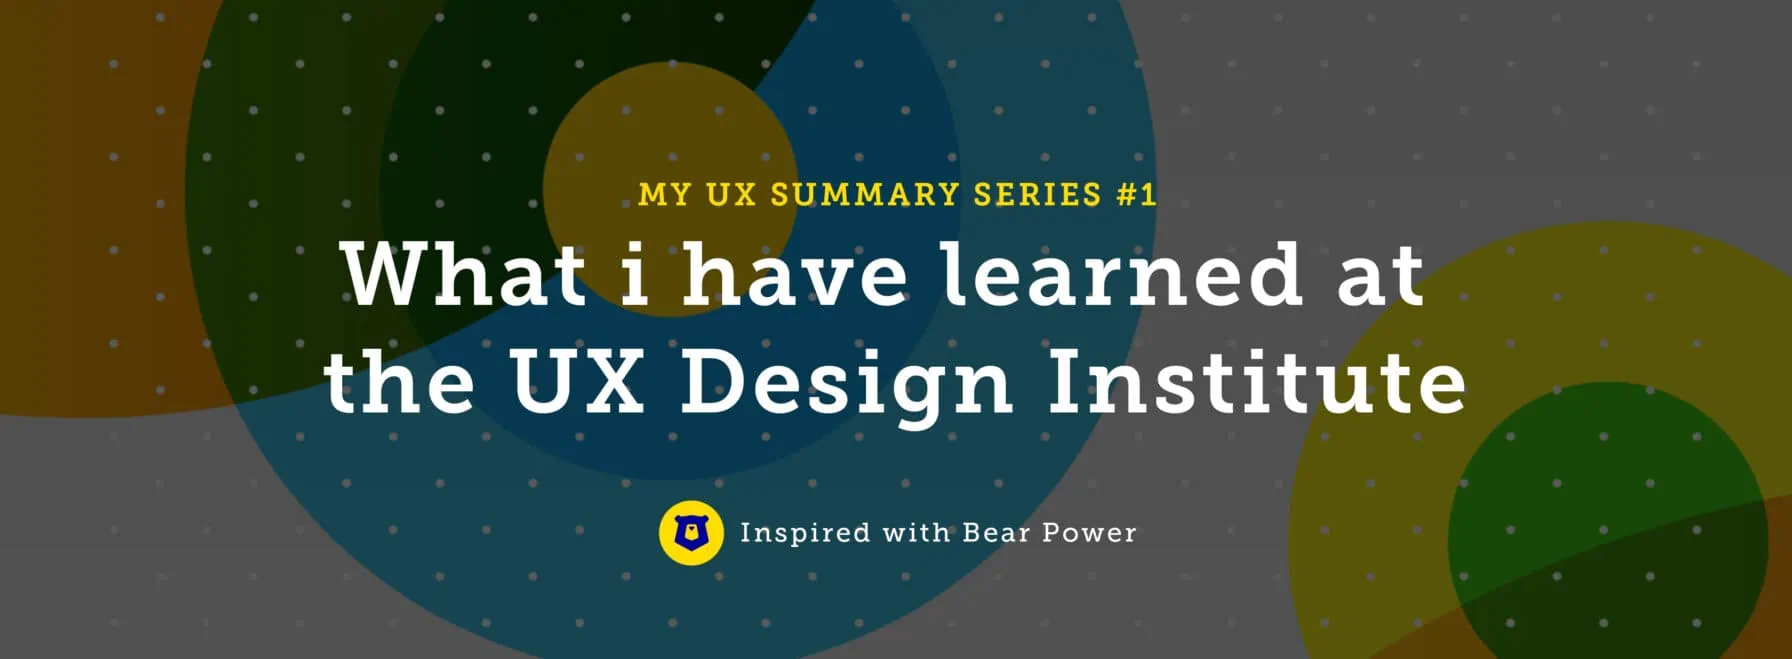 What I have learned at the UX Design Institute Course – Learn ux design series #1